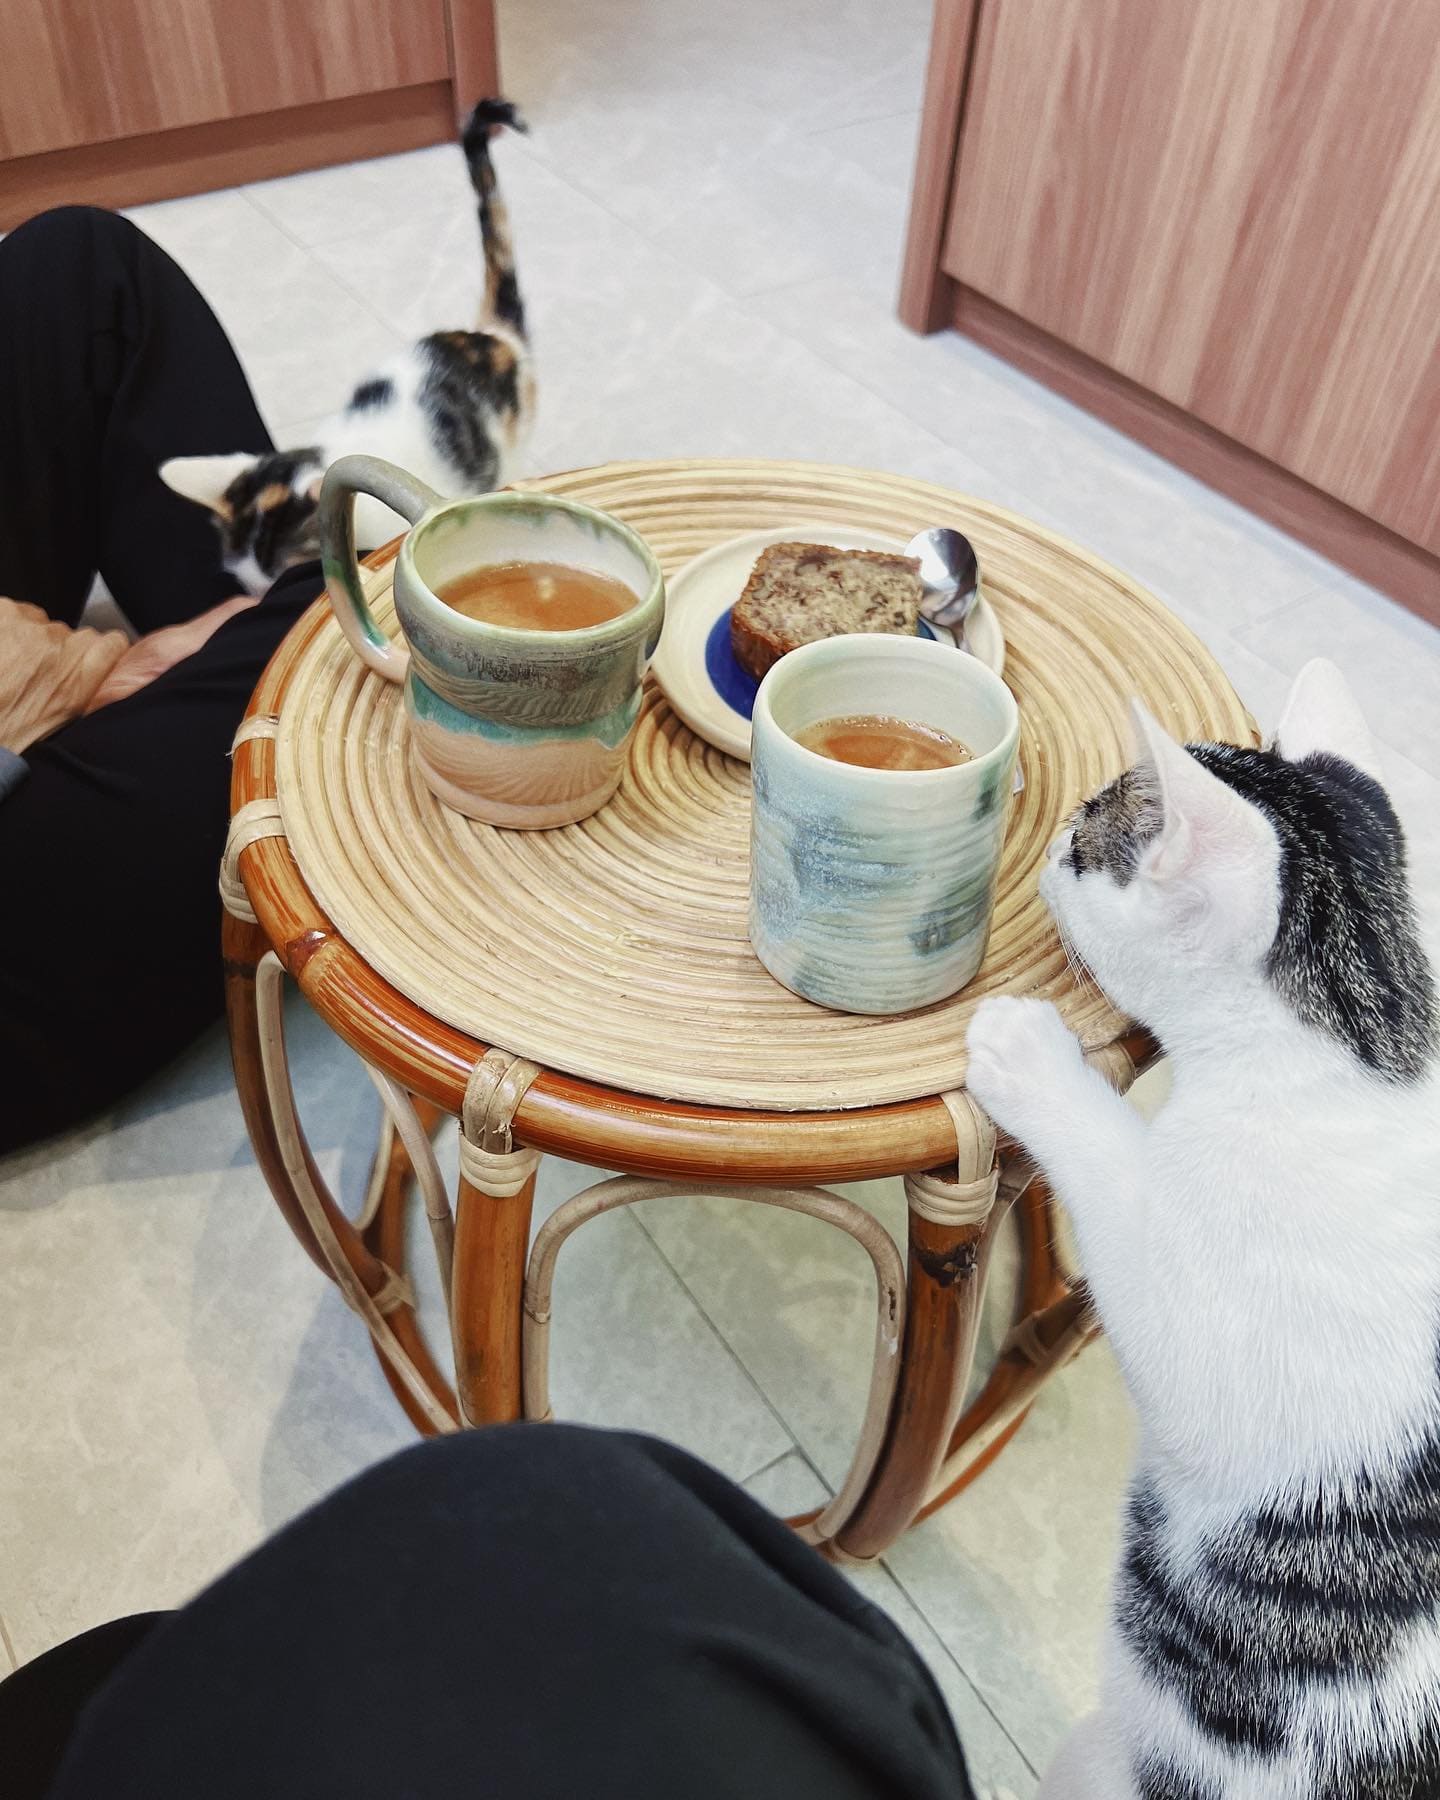 The Kitty Kampung - tea and cake with cats